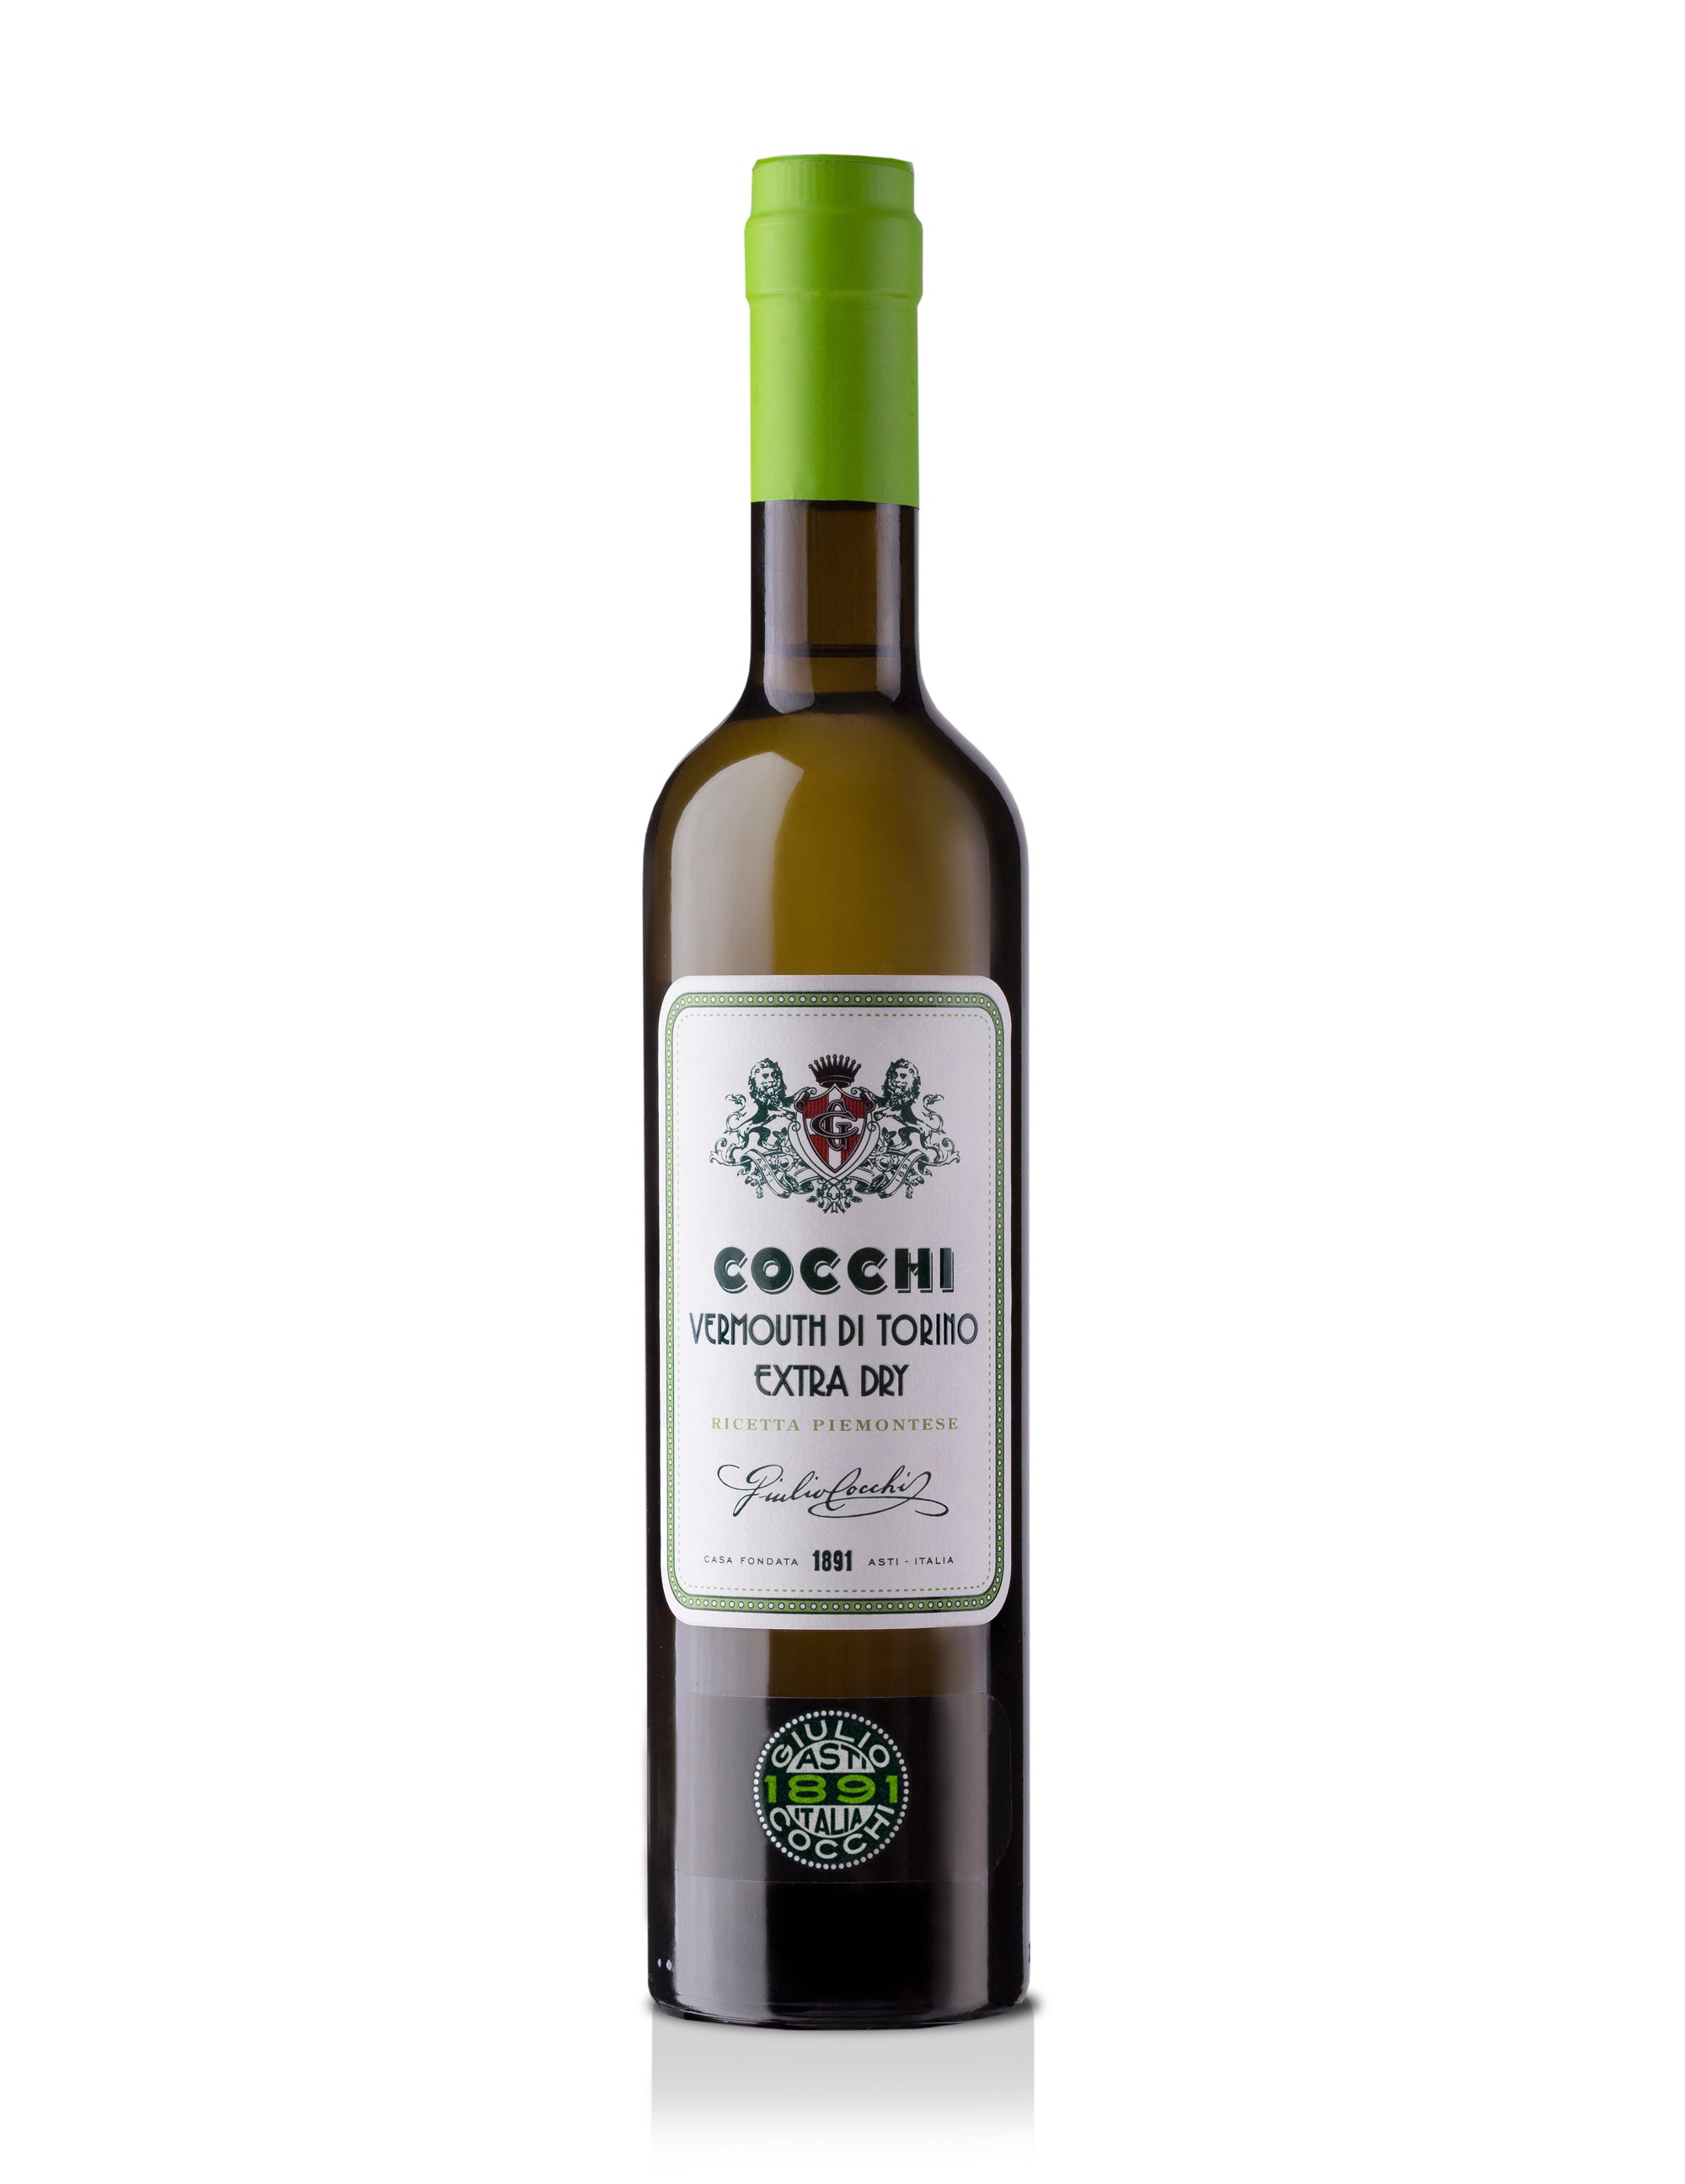 COCCHI Extra Dry Vermouth 17% 500ml